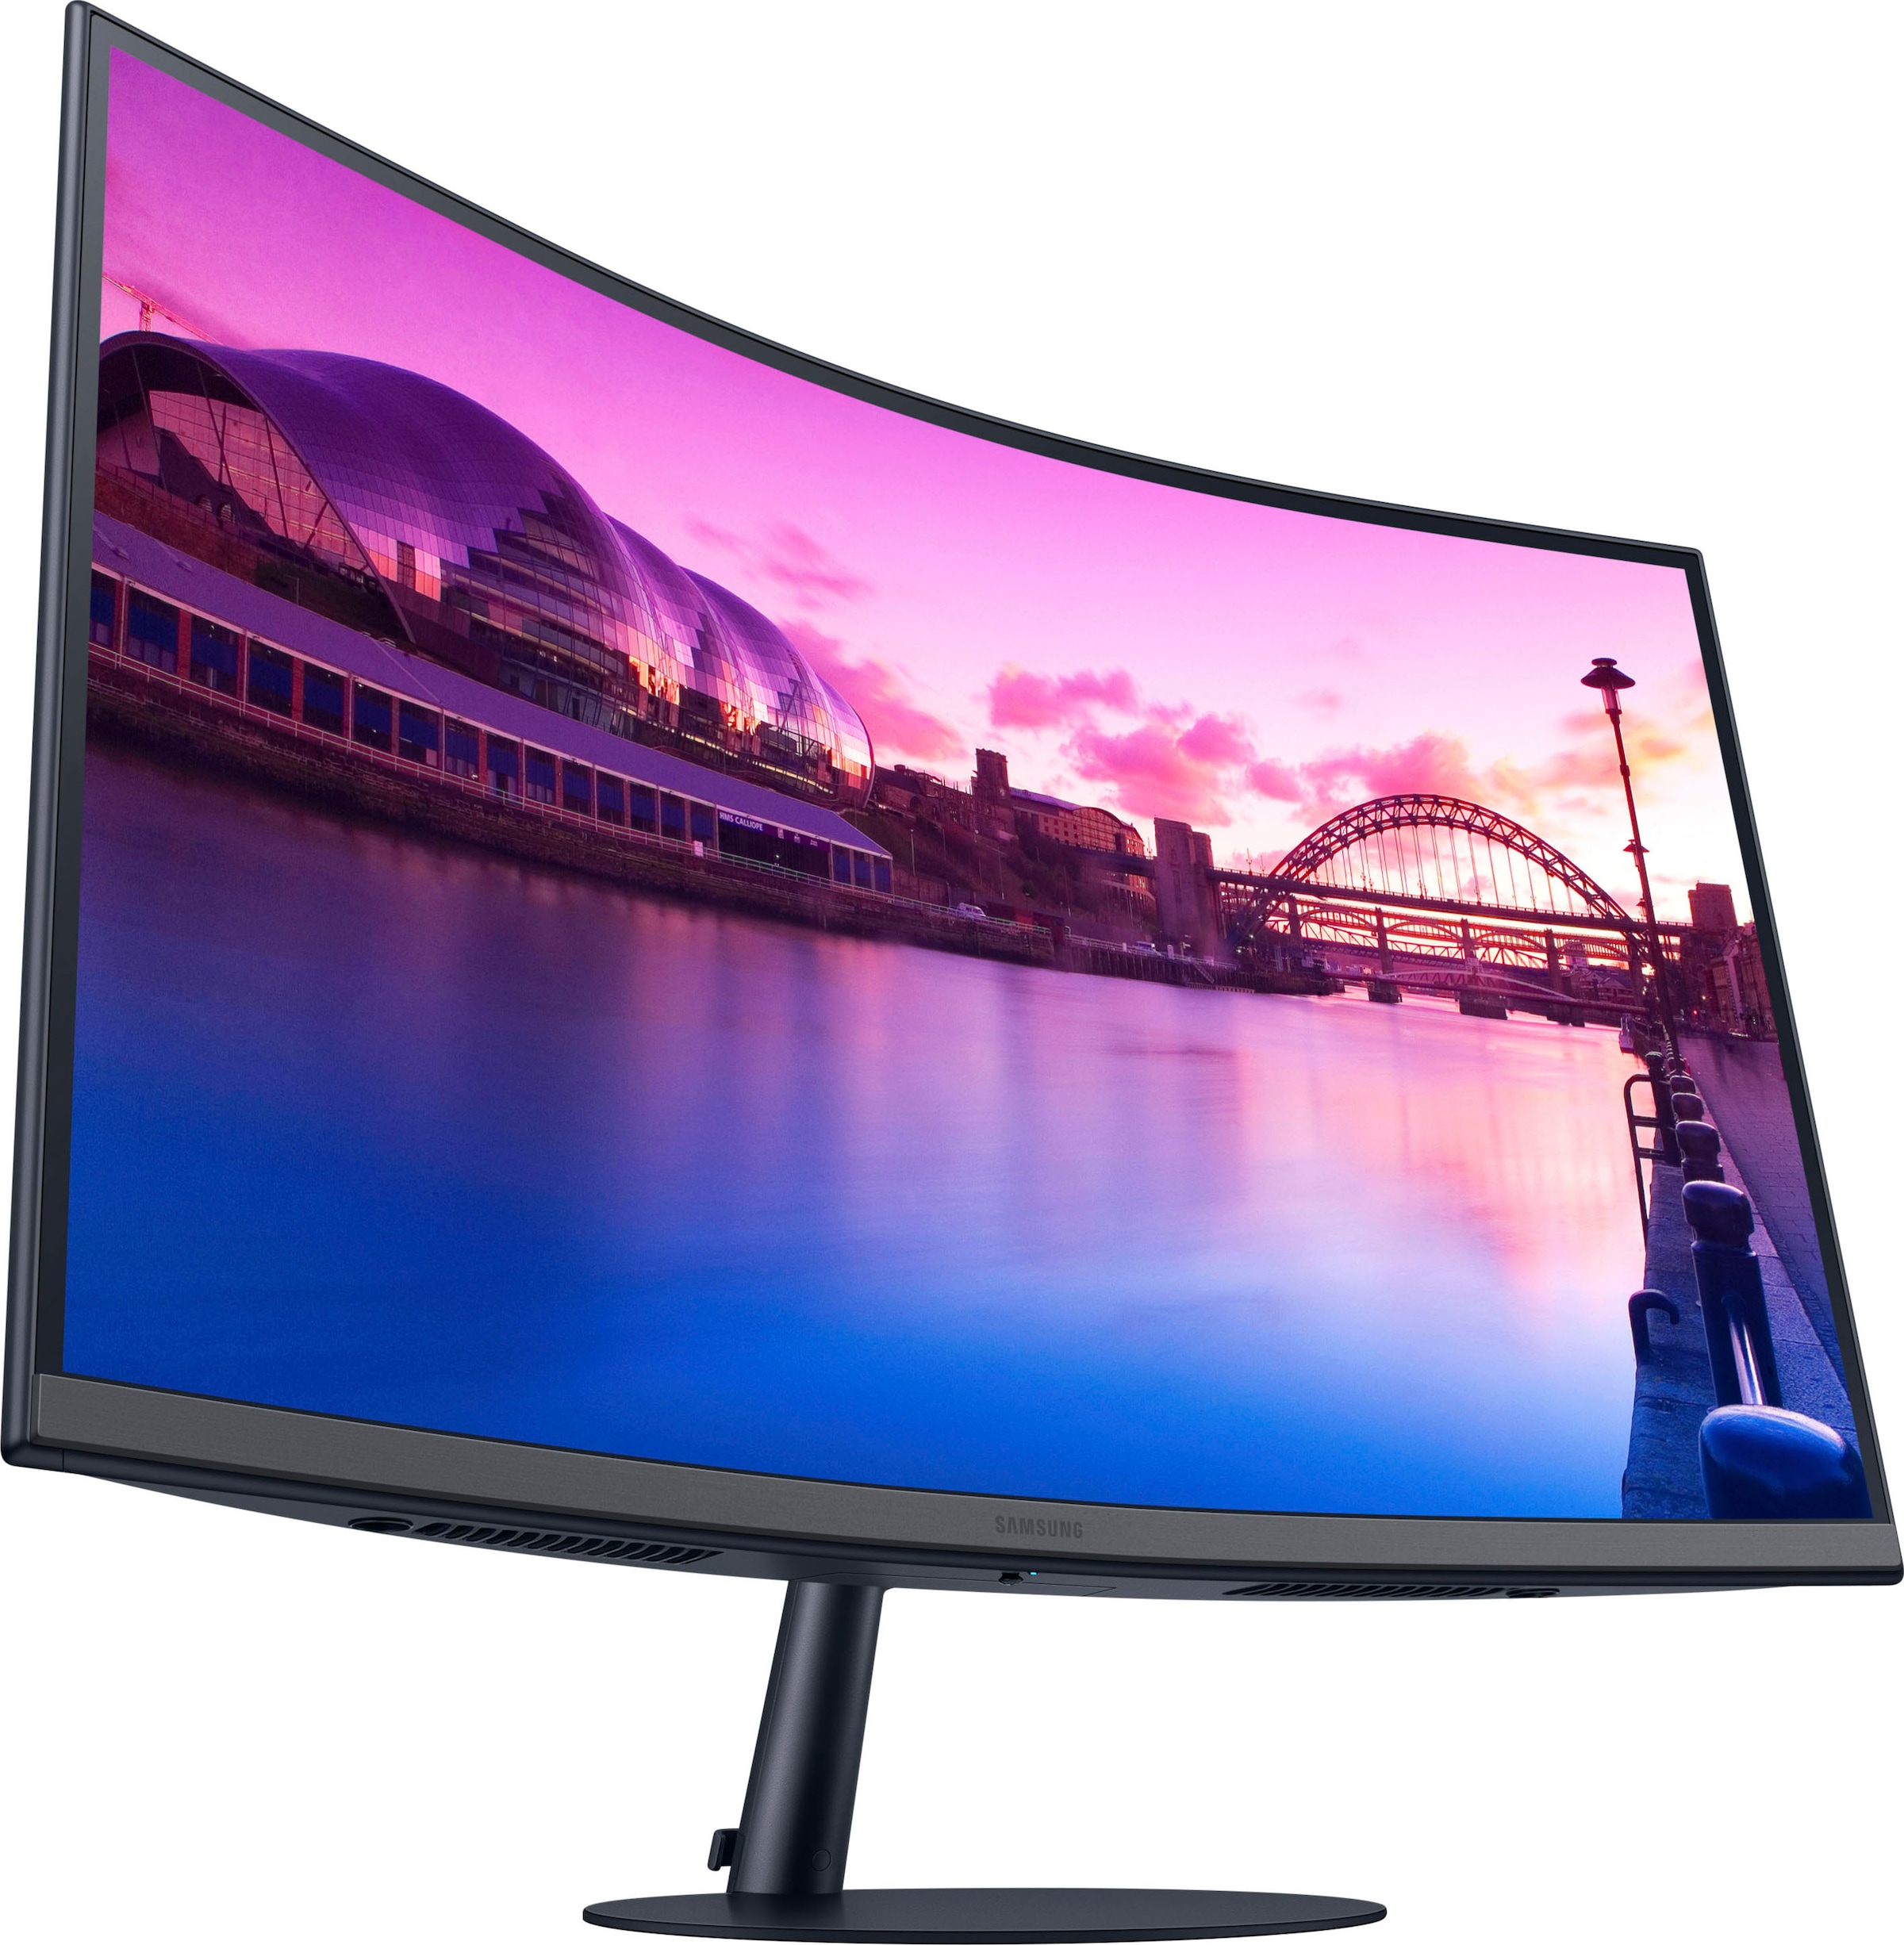 Samsung Curved-LED-Monitor »S27C390EAU«, 68,6 cm/27 Zoll, 1920 x 1080 px, Full HD, 4 ms Reaktionszeit, 75 Hz